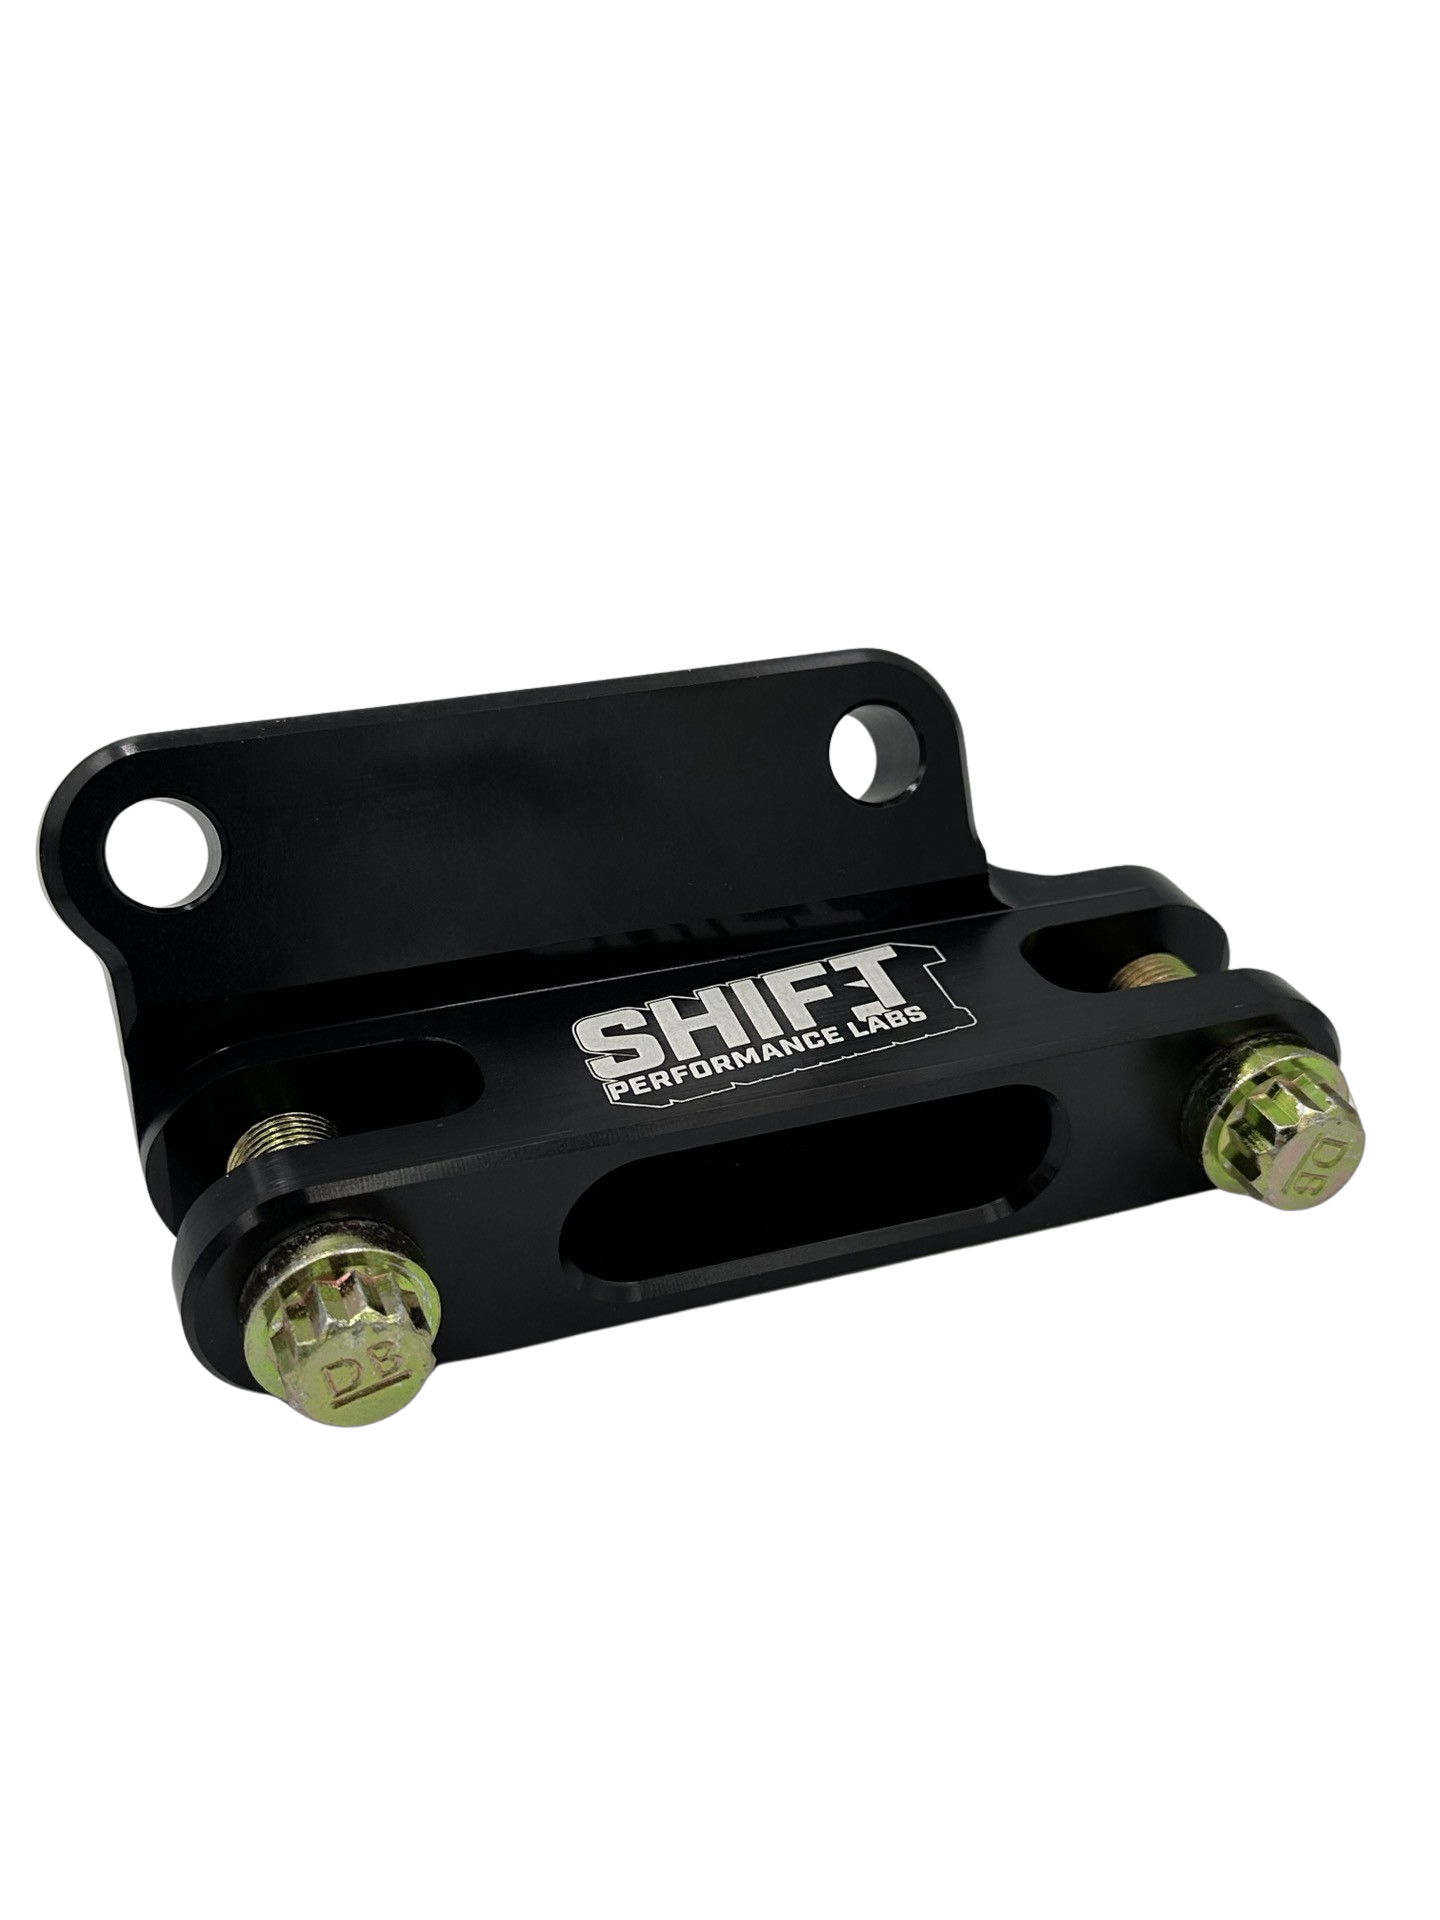 SHIFT Performance Labs Can Am X3 Steering Flag Clevis Setup